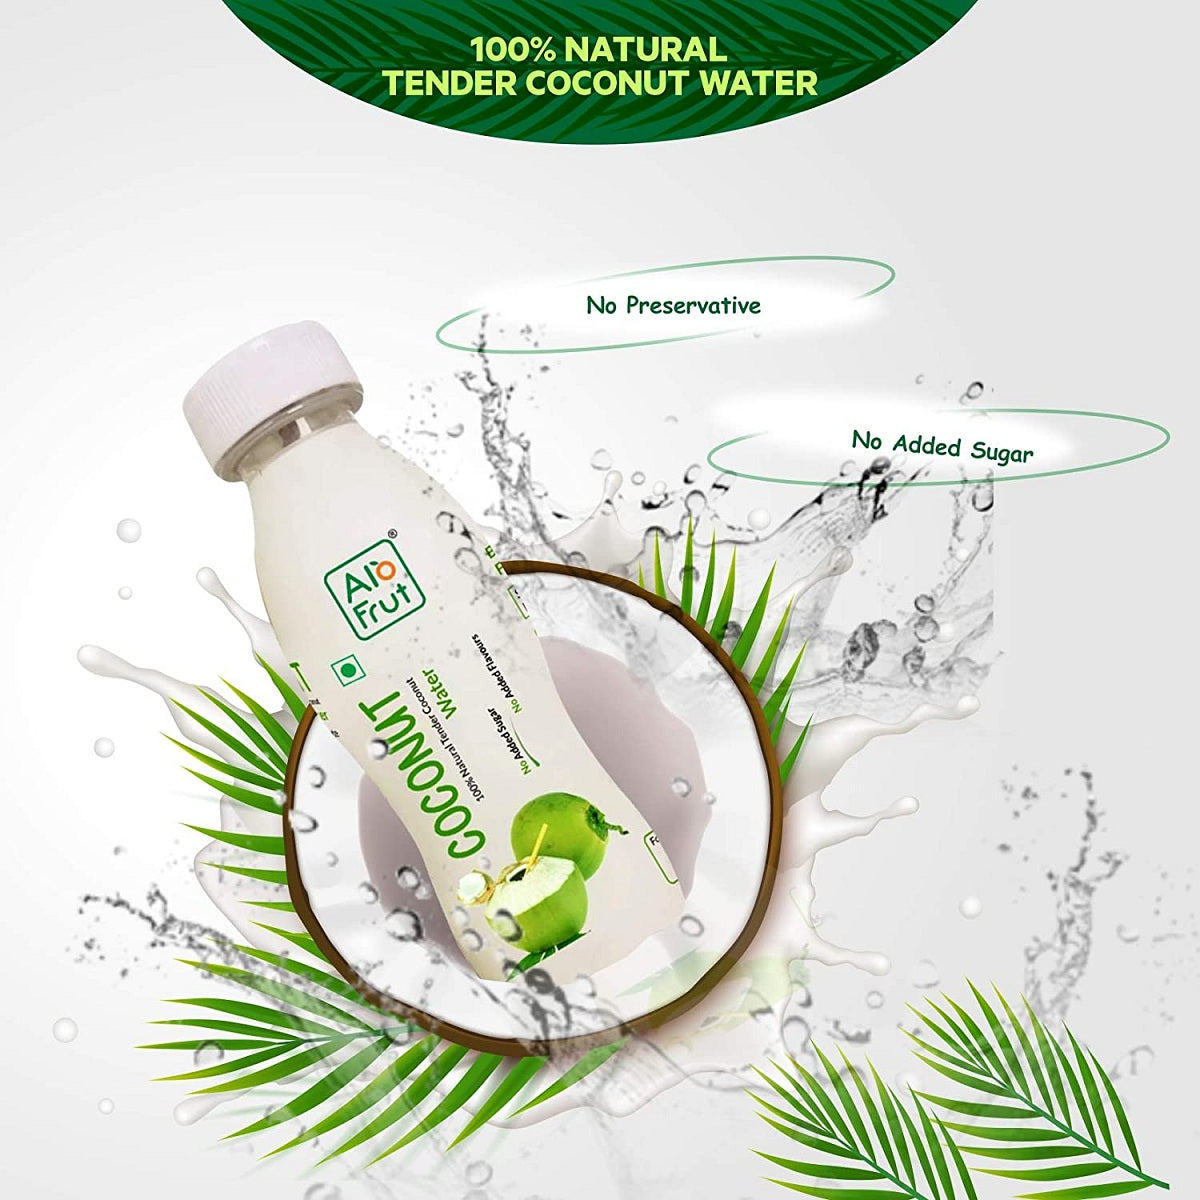 Products AloFrut Tender Coconut Water 200ml